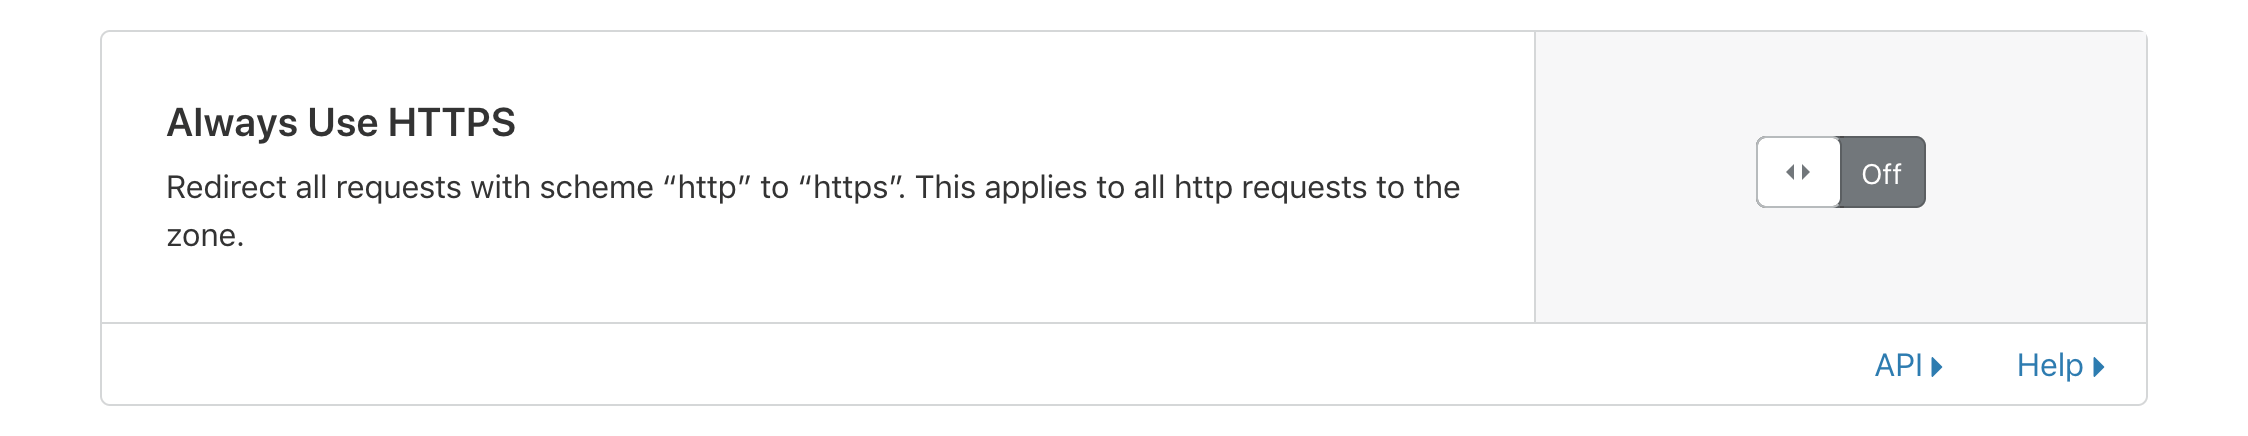 Cloudflare Always Use HTTPS